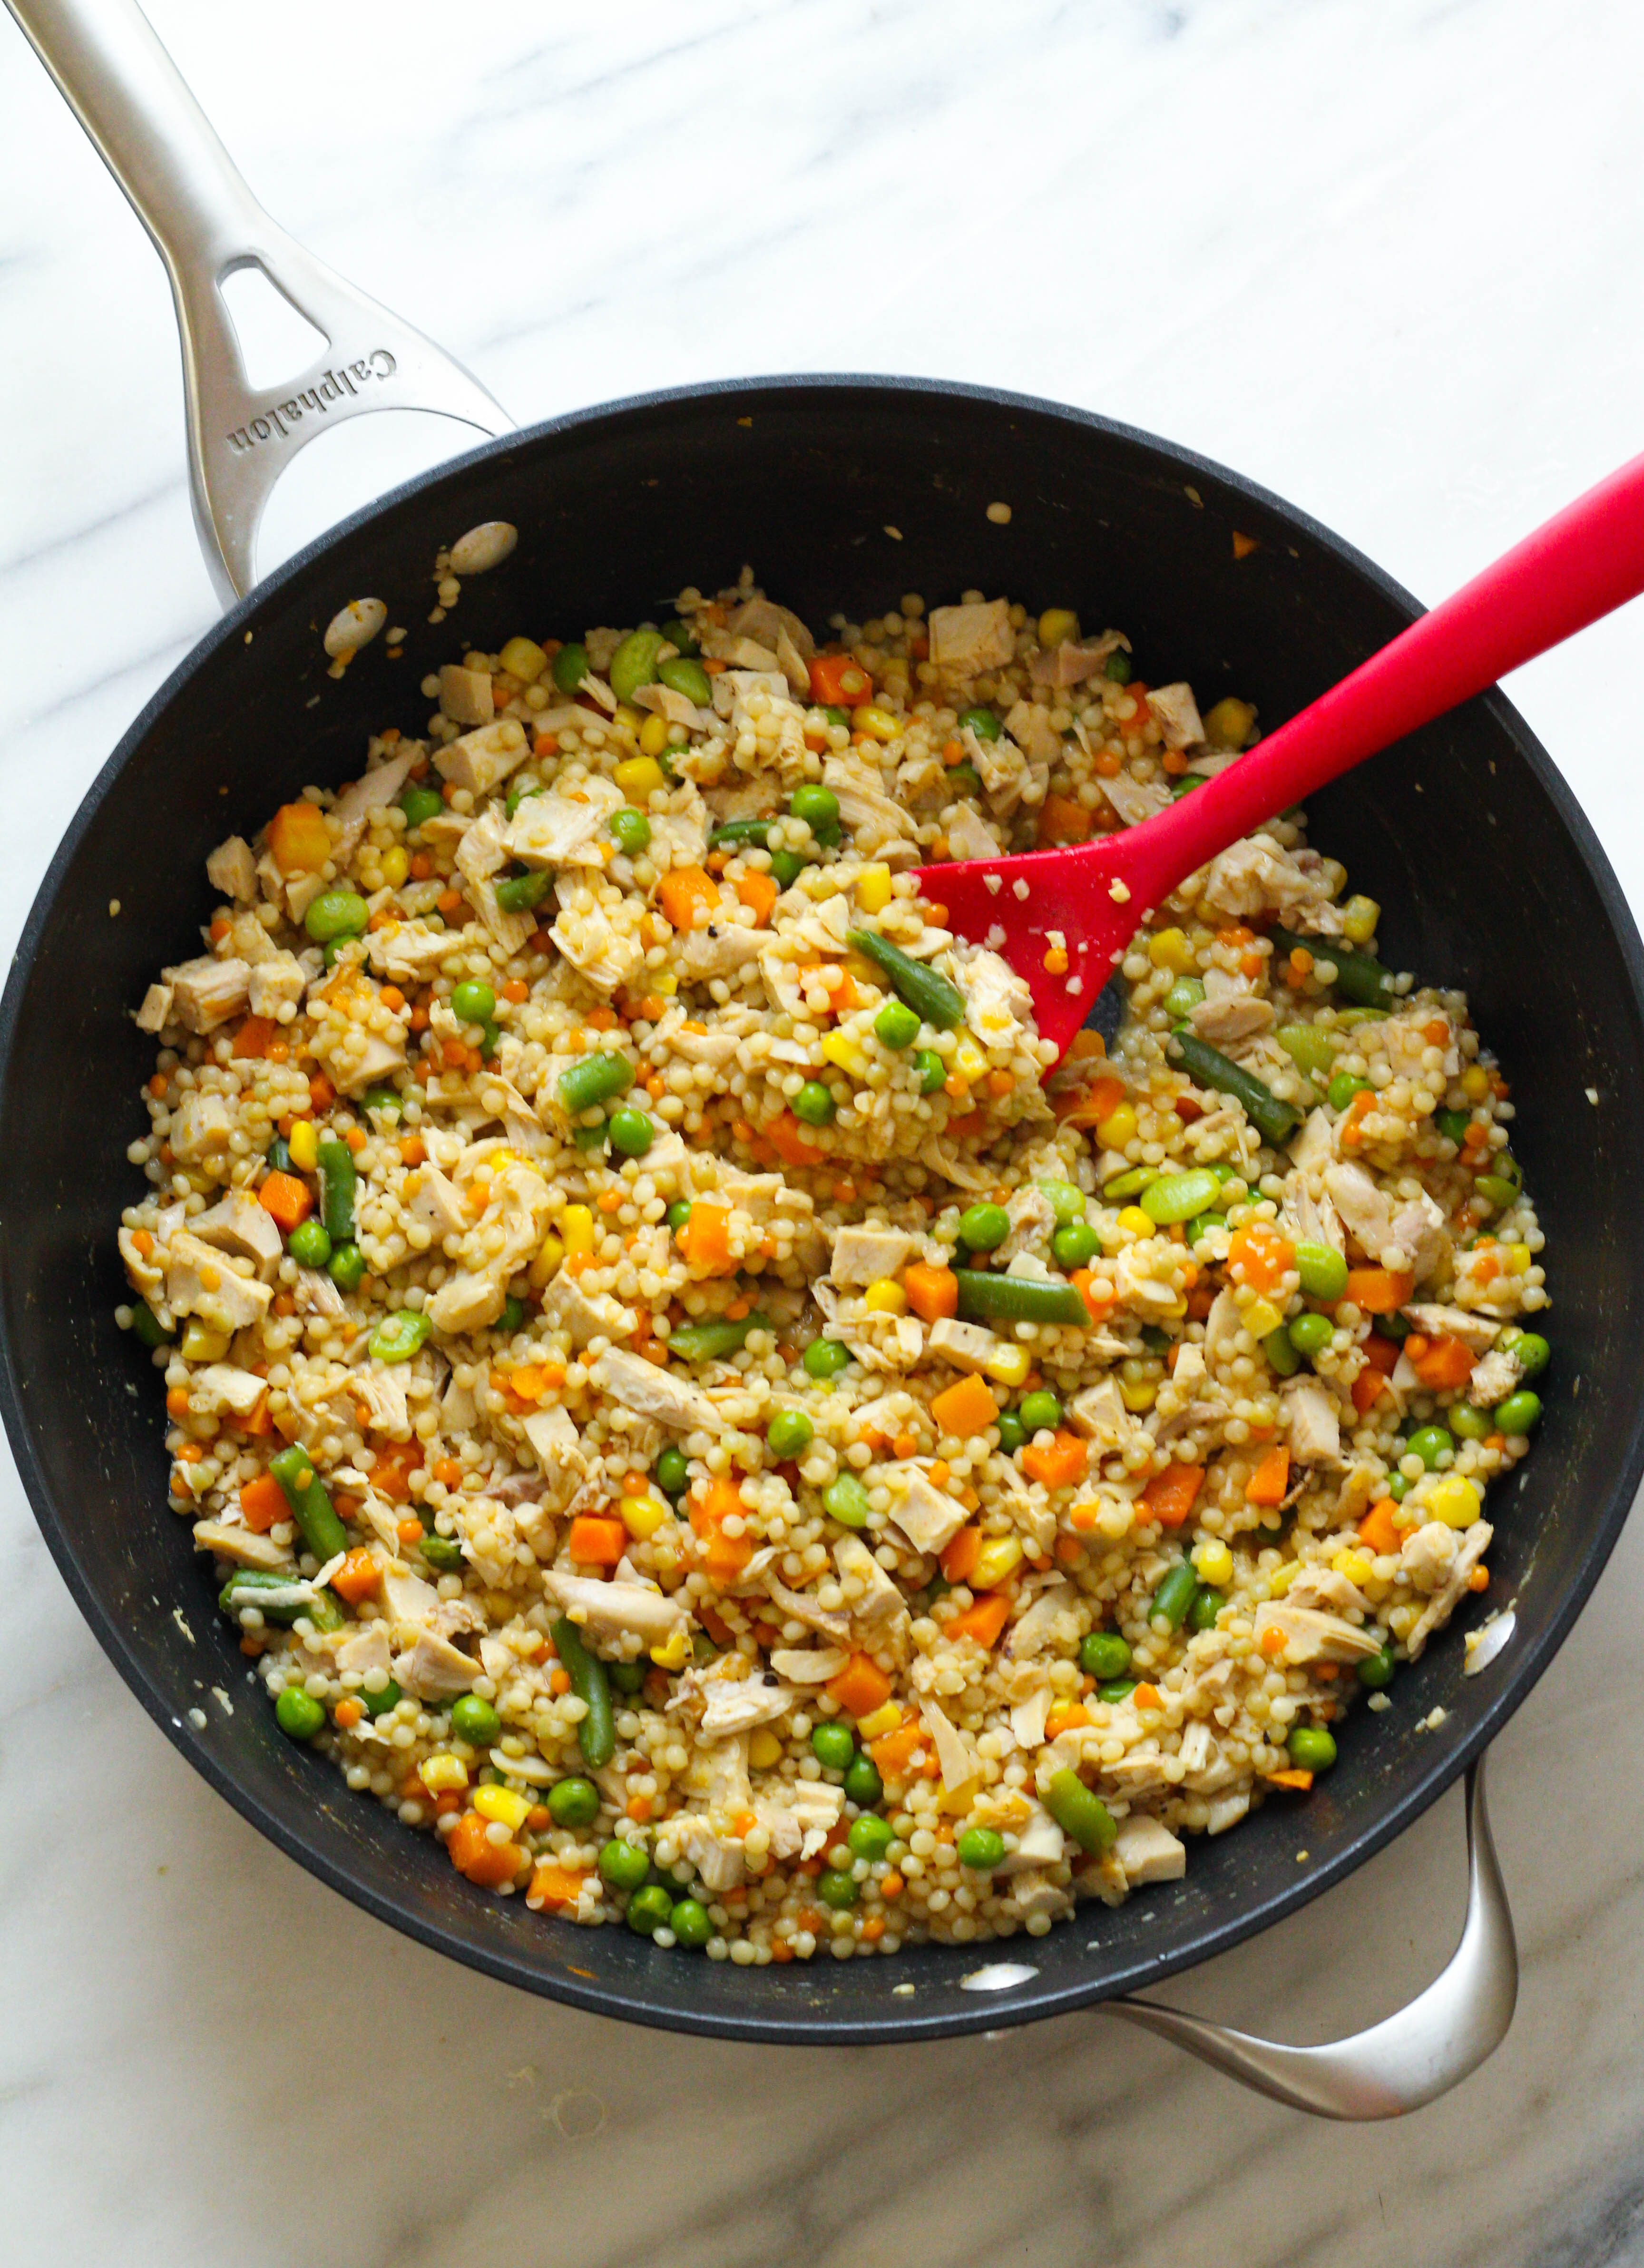 Pearled couscous chicken, simmered in broth with mixed veggies. An easy, delicious dinner that can be ready in less than 15 minutes. 